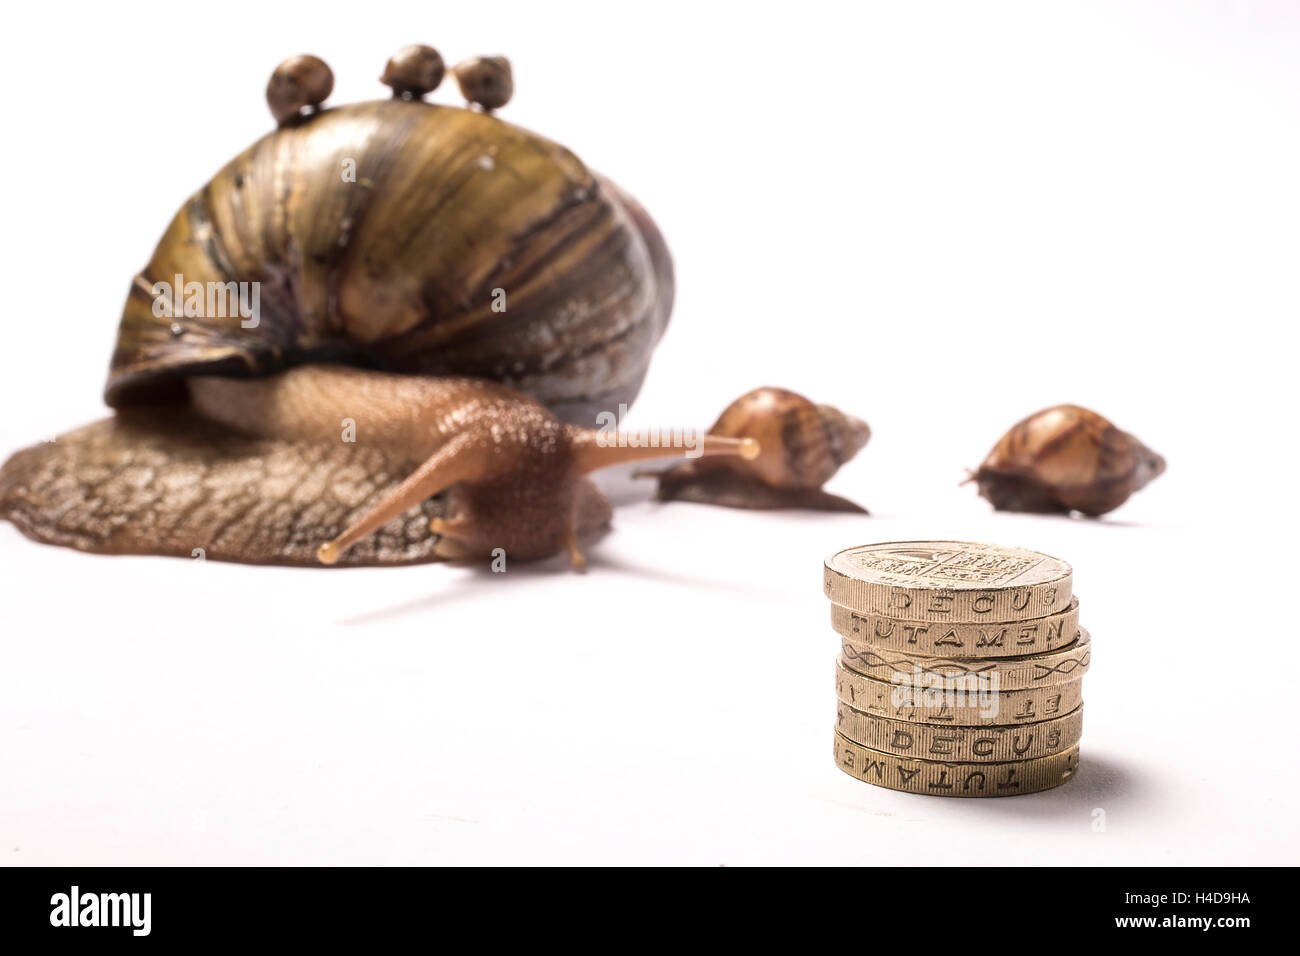 African giant snail with three babies on her shell and two older babies by her side and pound coin stack in front Stock Photo